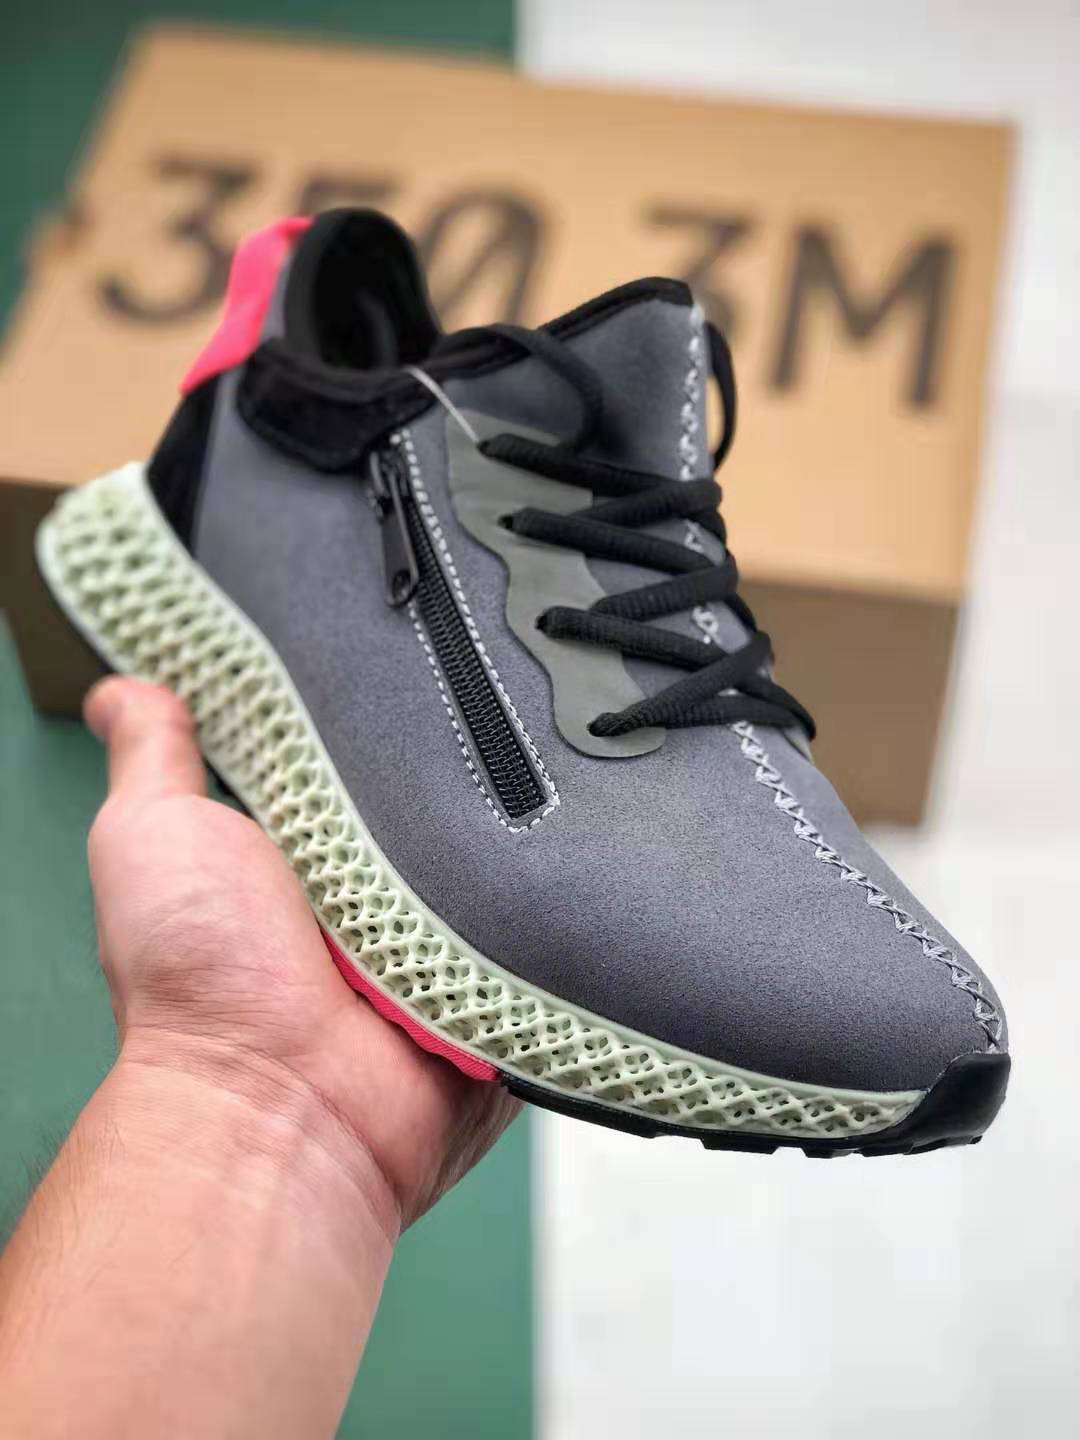 Adidas Yeezy Boost 4D 350 3M YB6606 - Top Sneaker for Ultimate Style